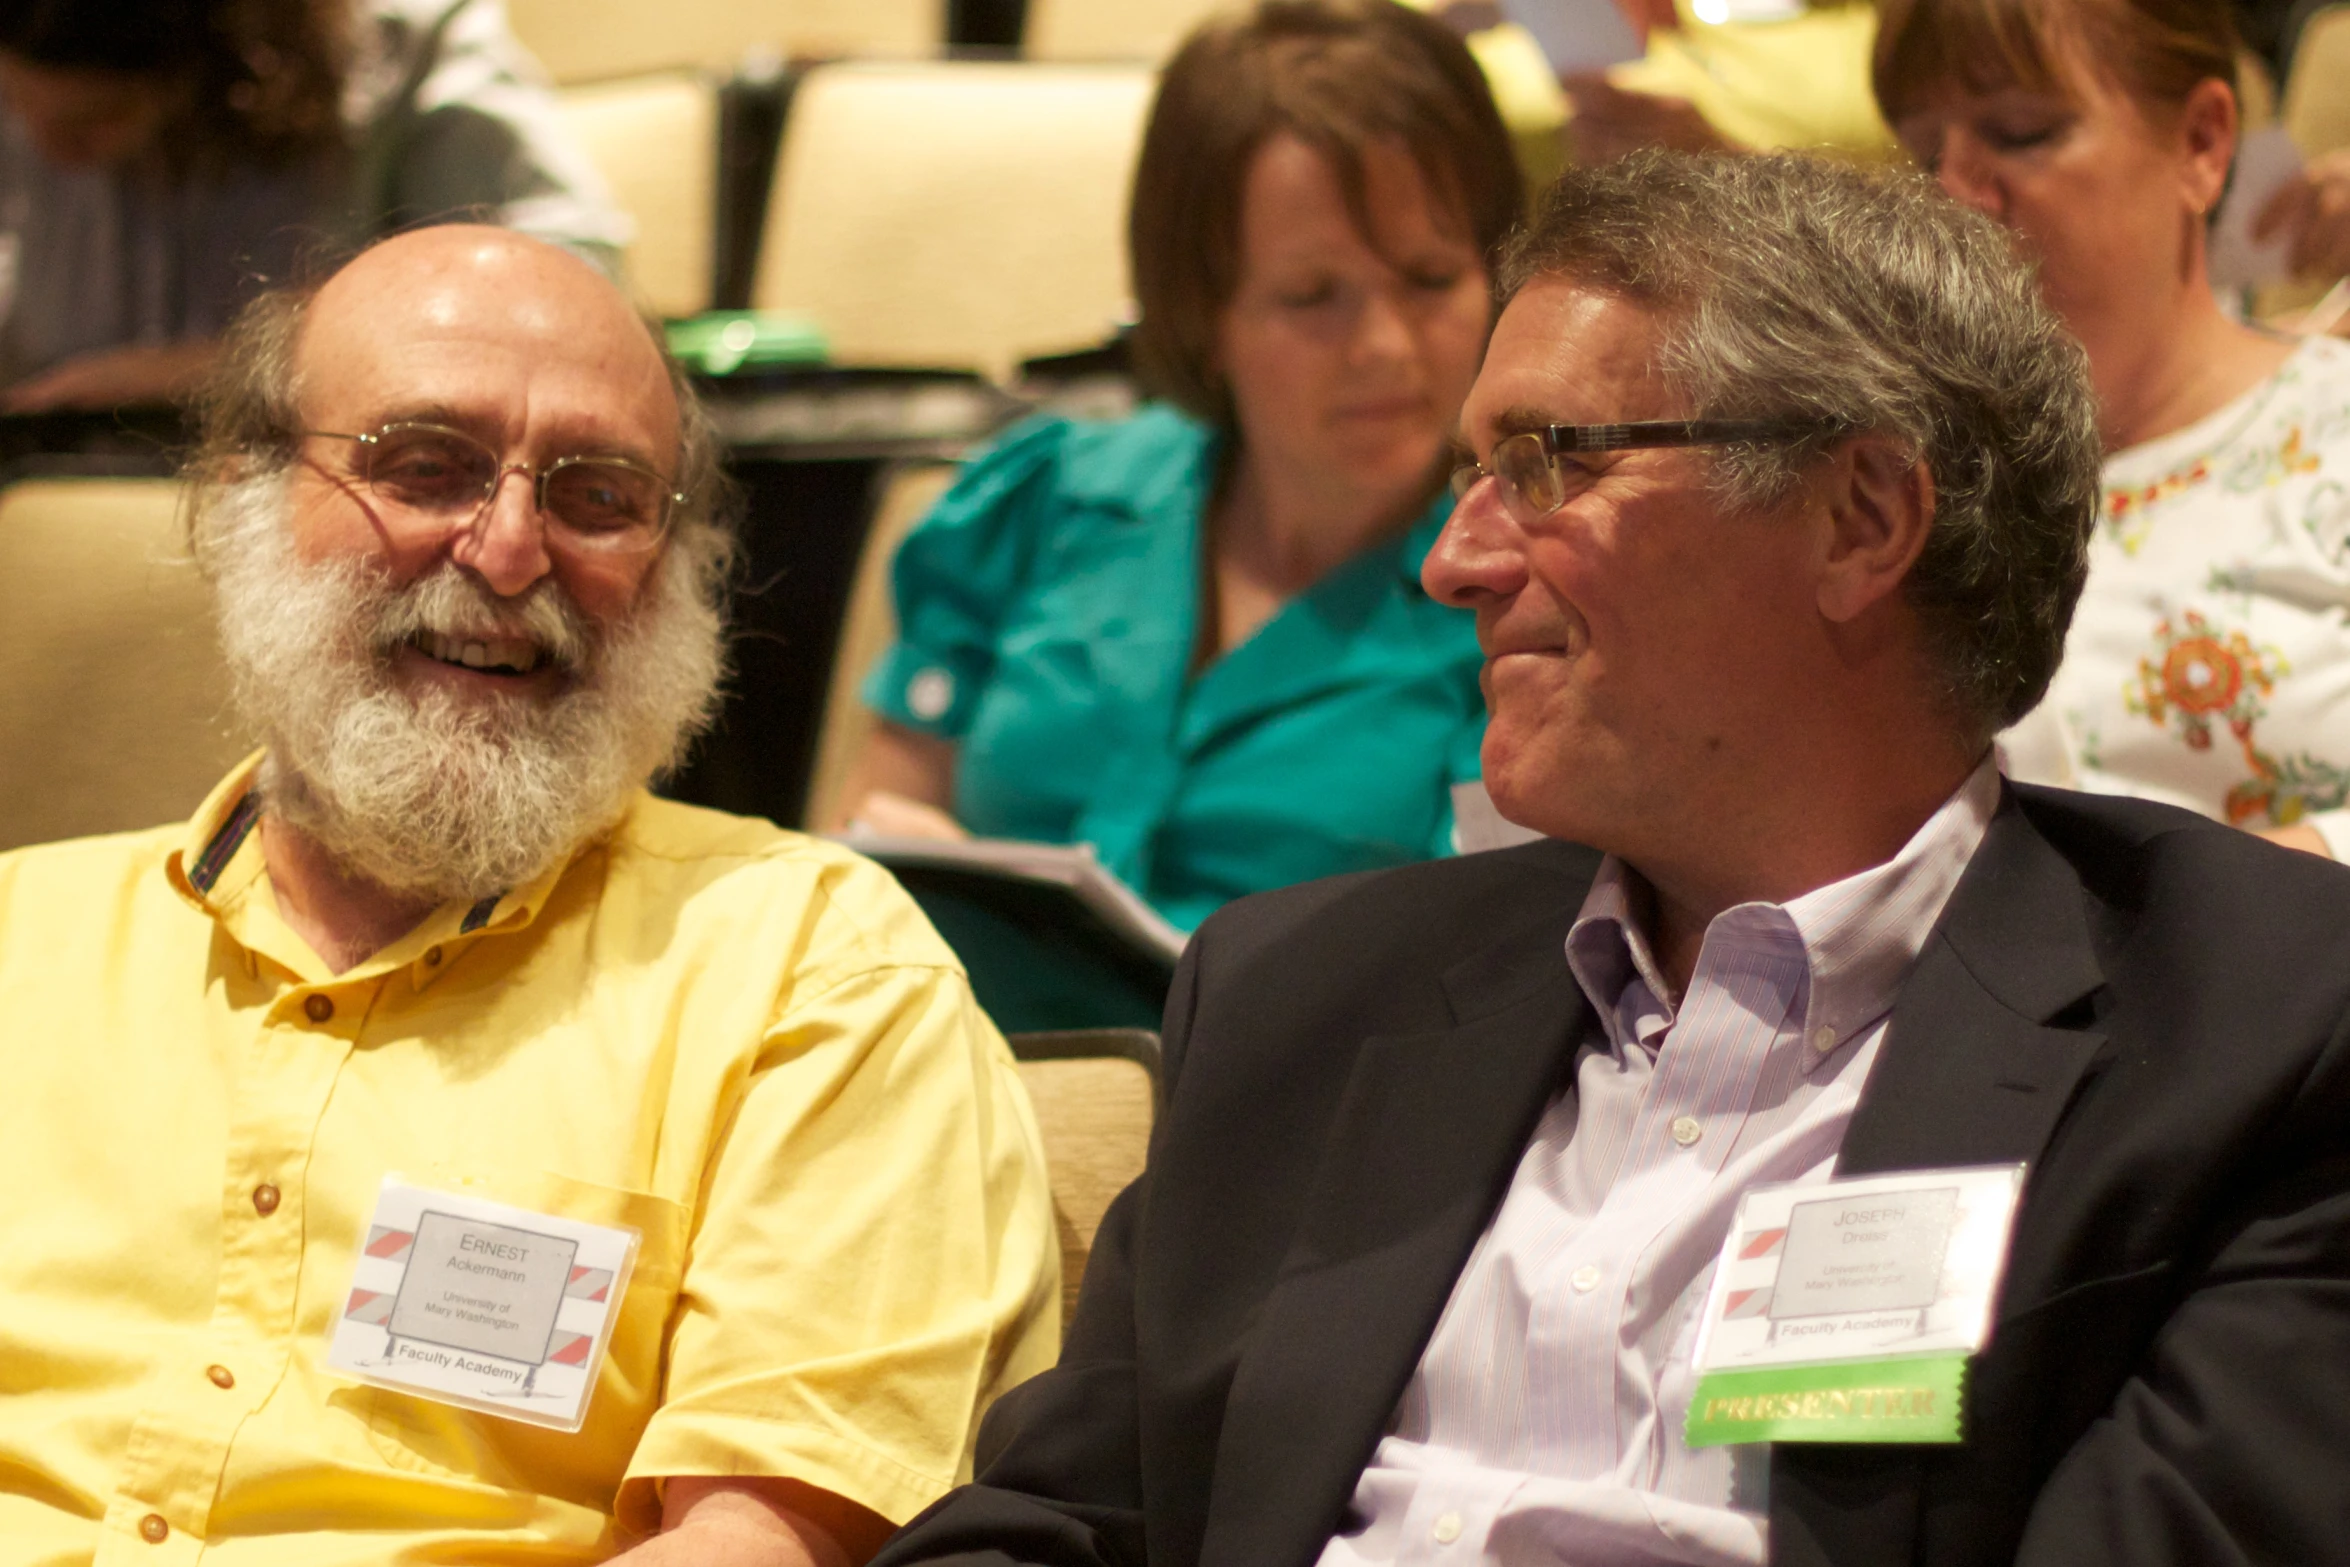 the man with a white beard sits next to another man wearing glasses